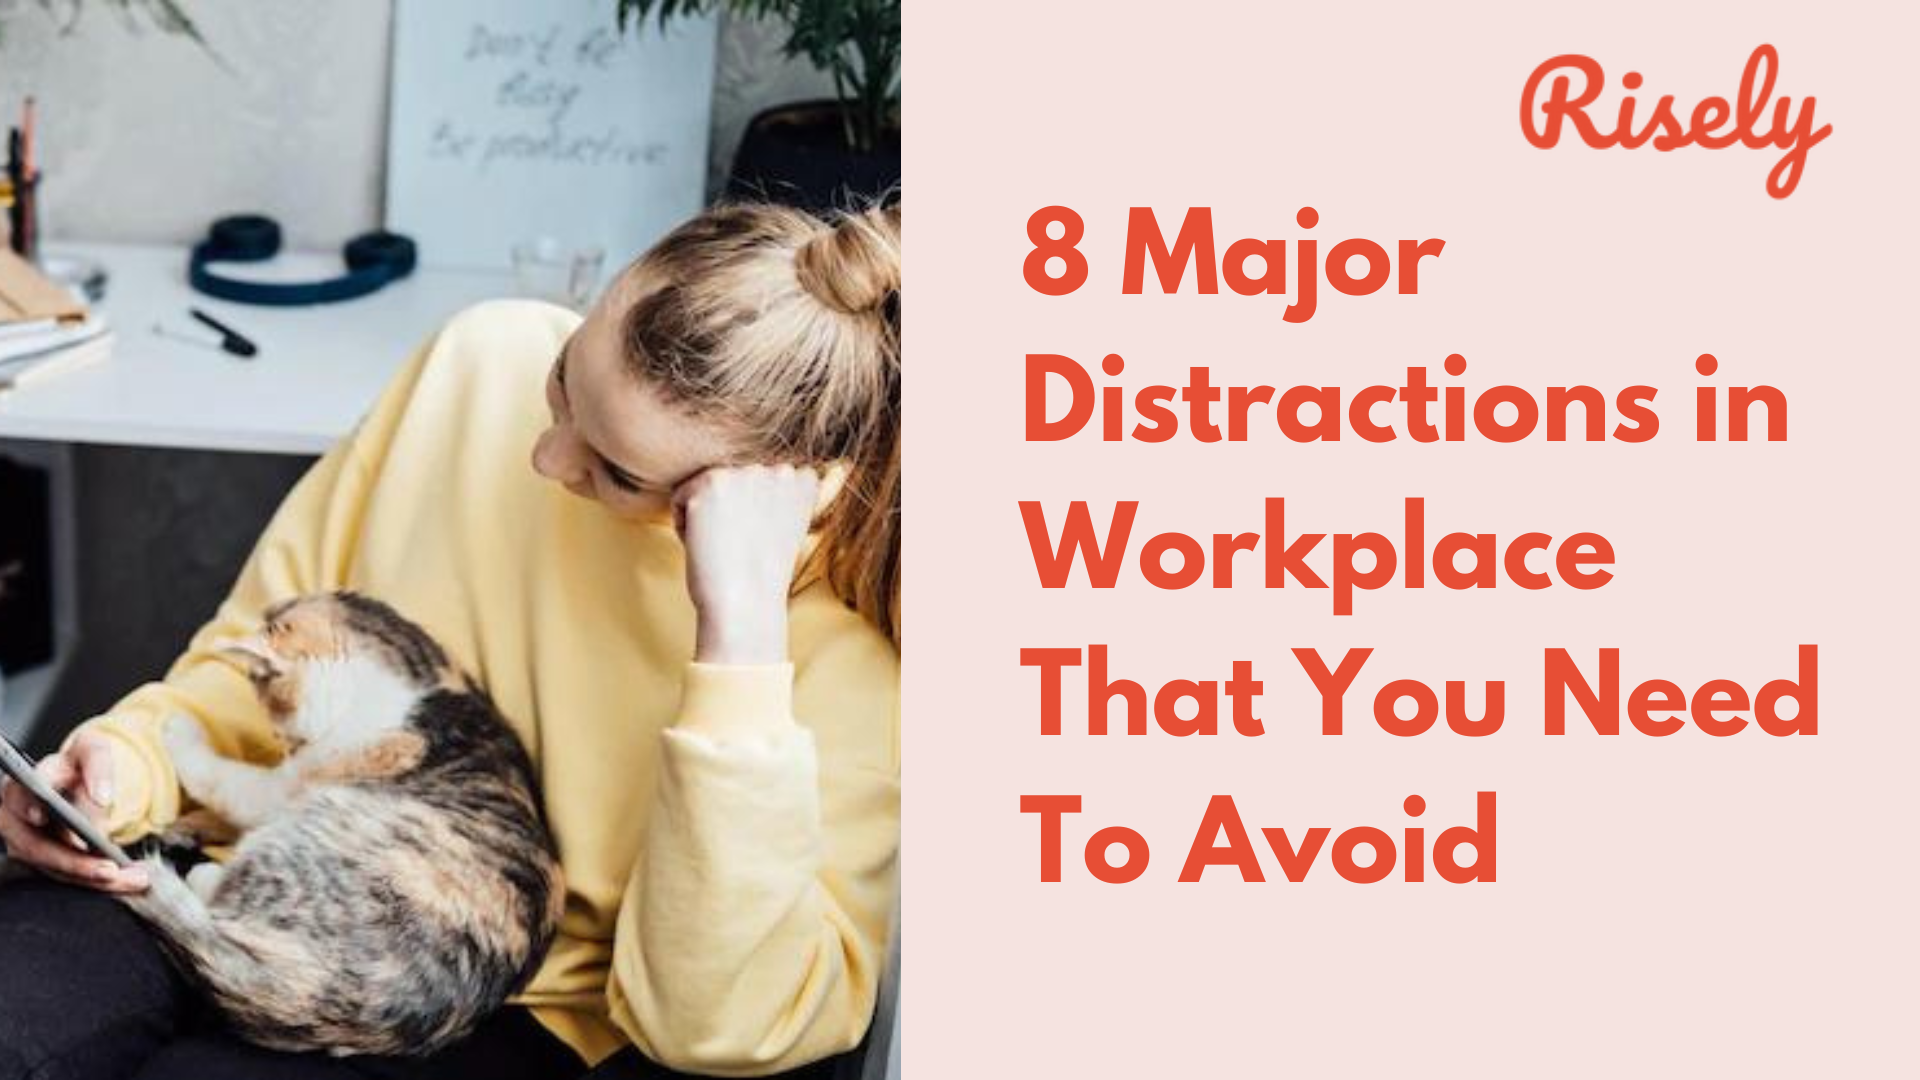 Distractions in Workplace